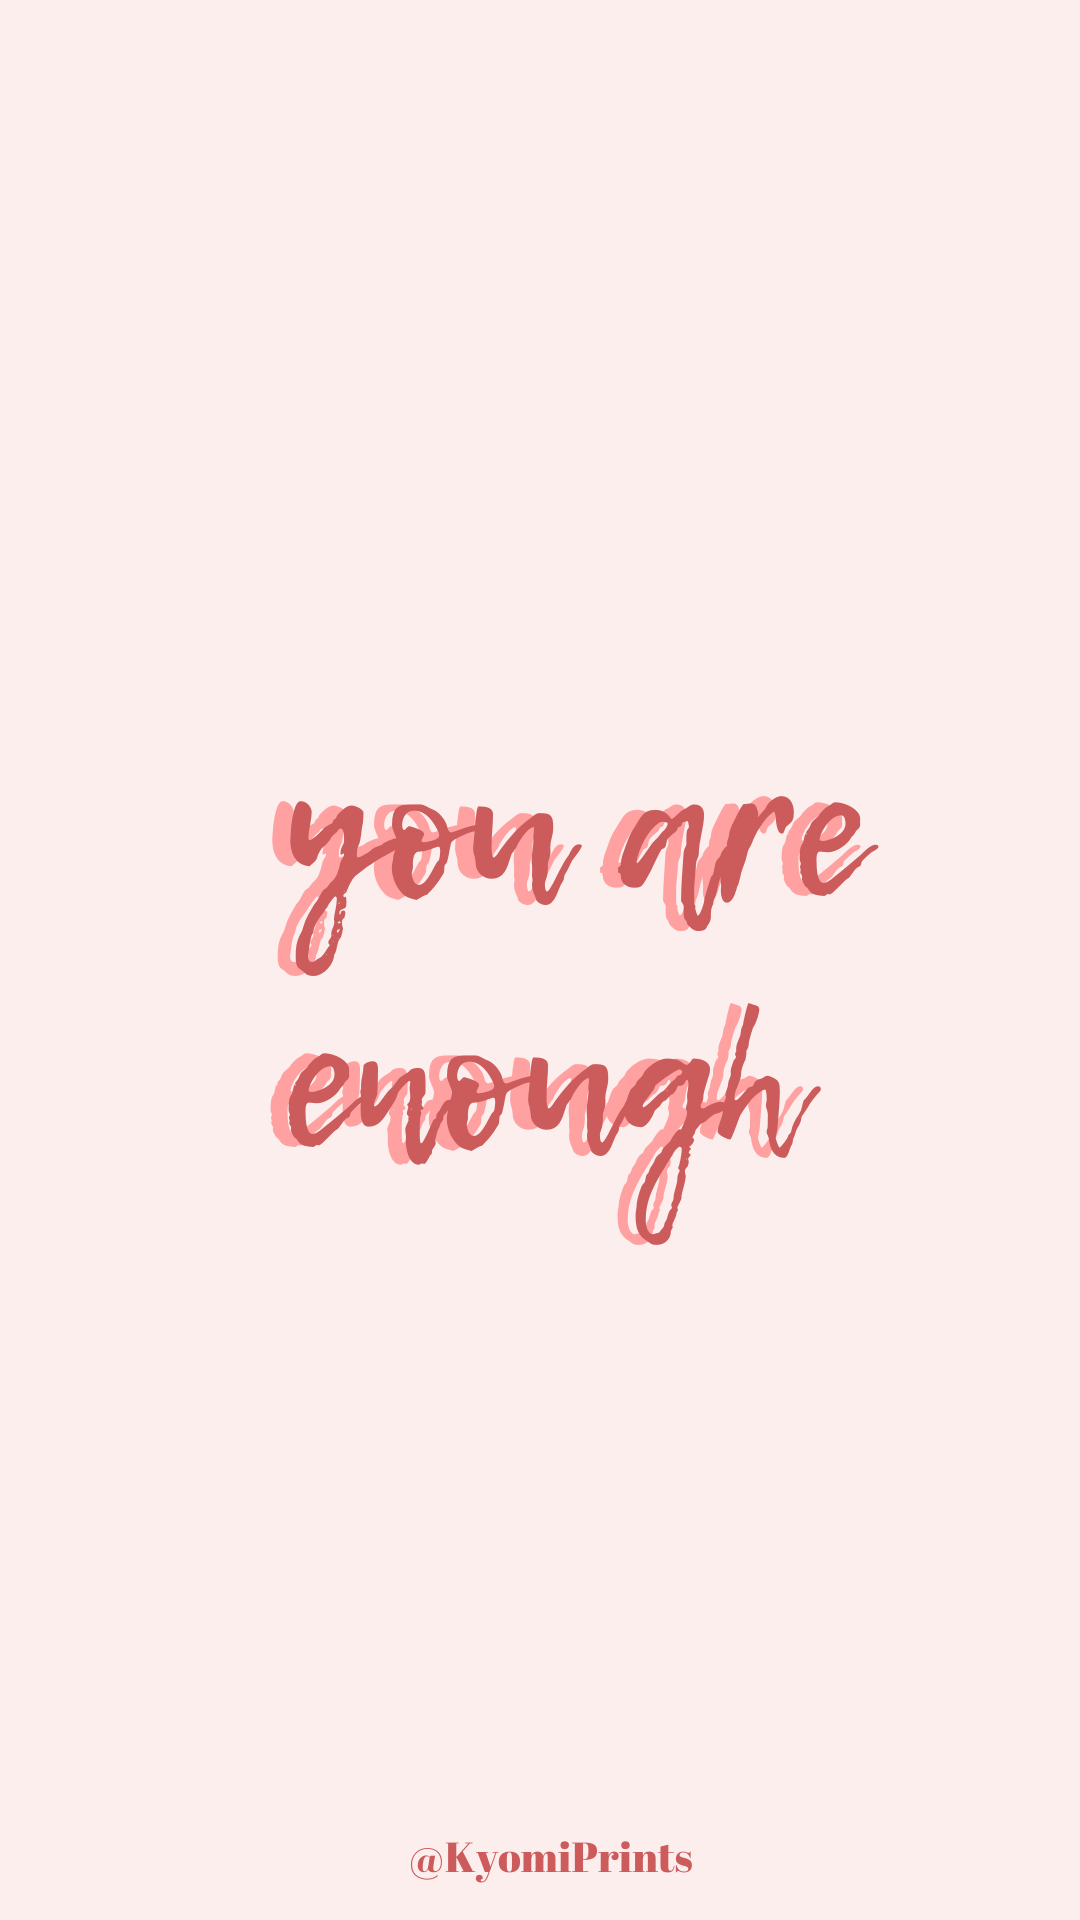 You are enough wallpaper, free wallpaper, iPhone wallpaper, pink aesthetics background -   17 most beauty Wallpaper ideas